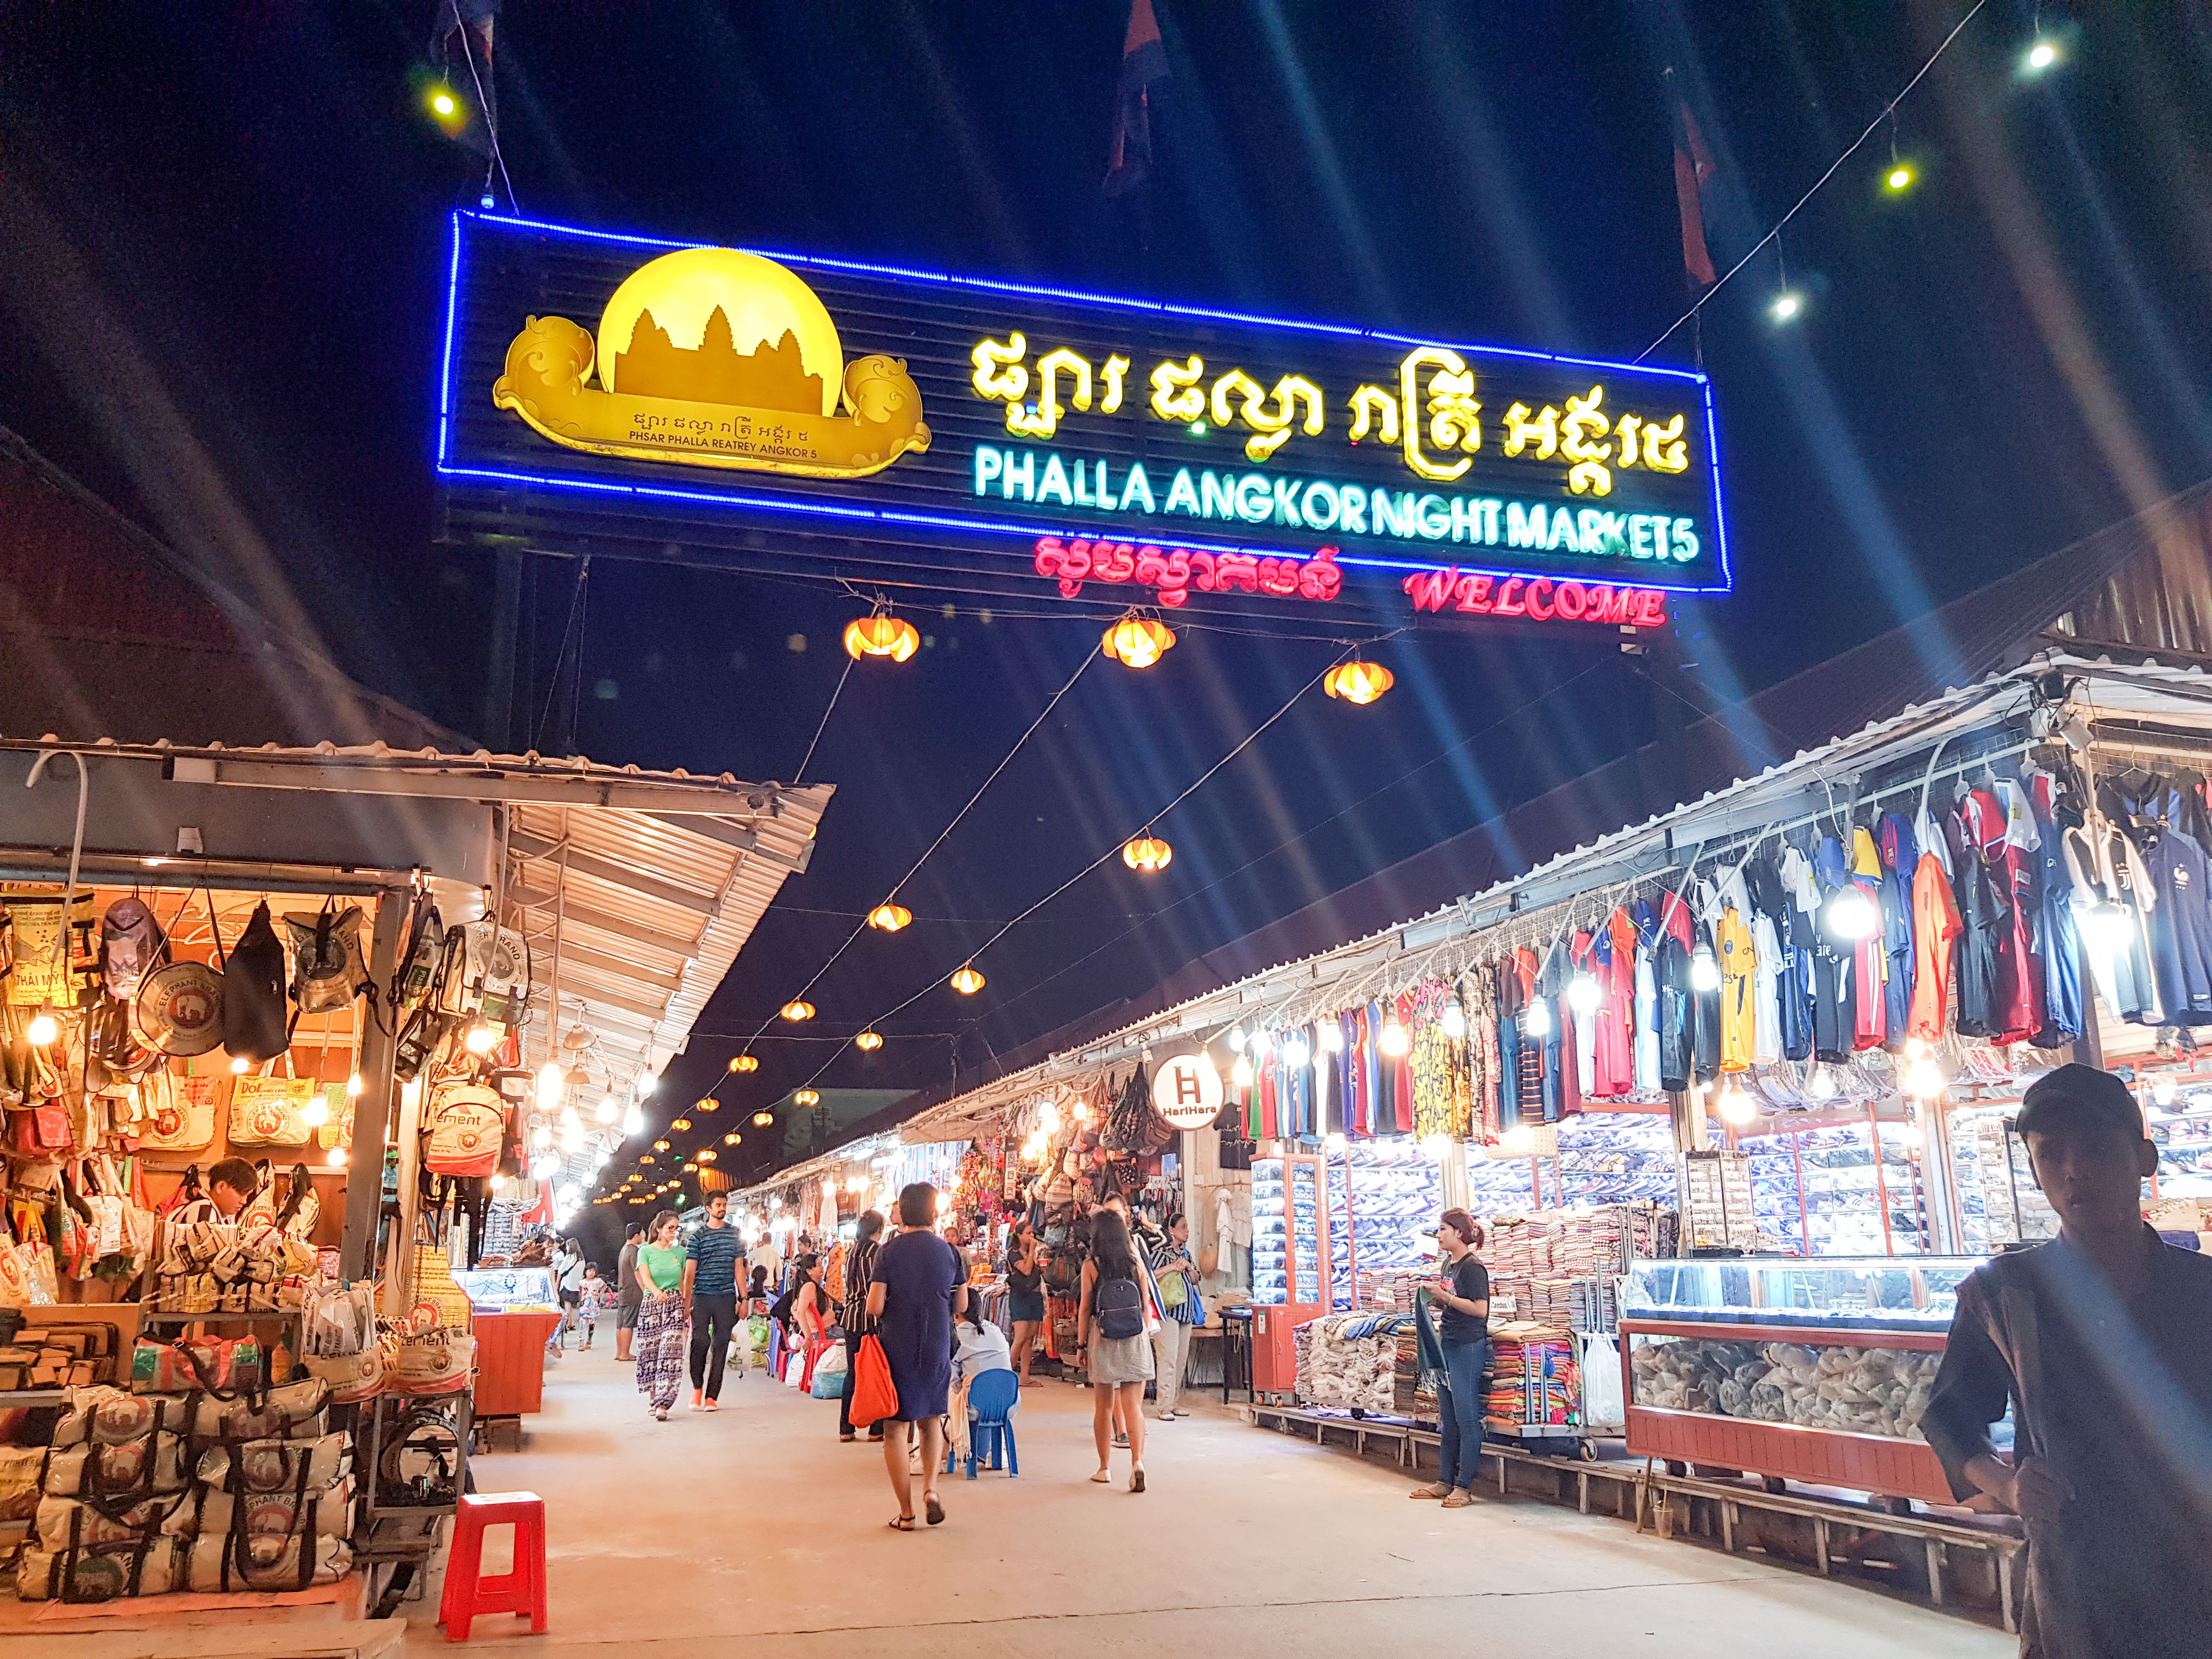 Tour the night markets | Honeymoon in Siem Reap -Romantic things to do